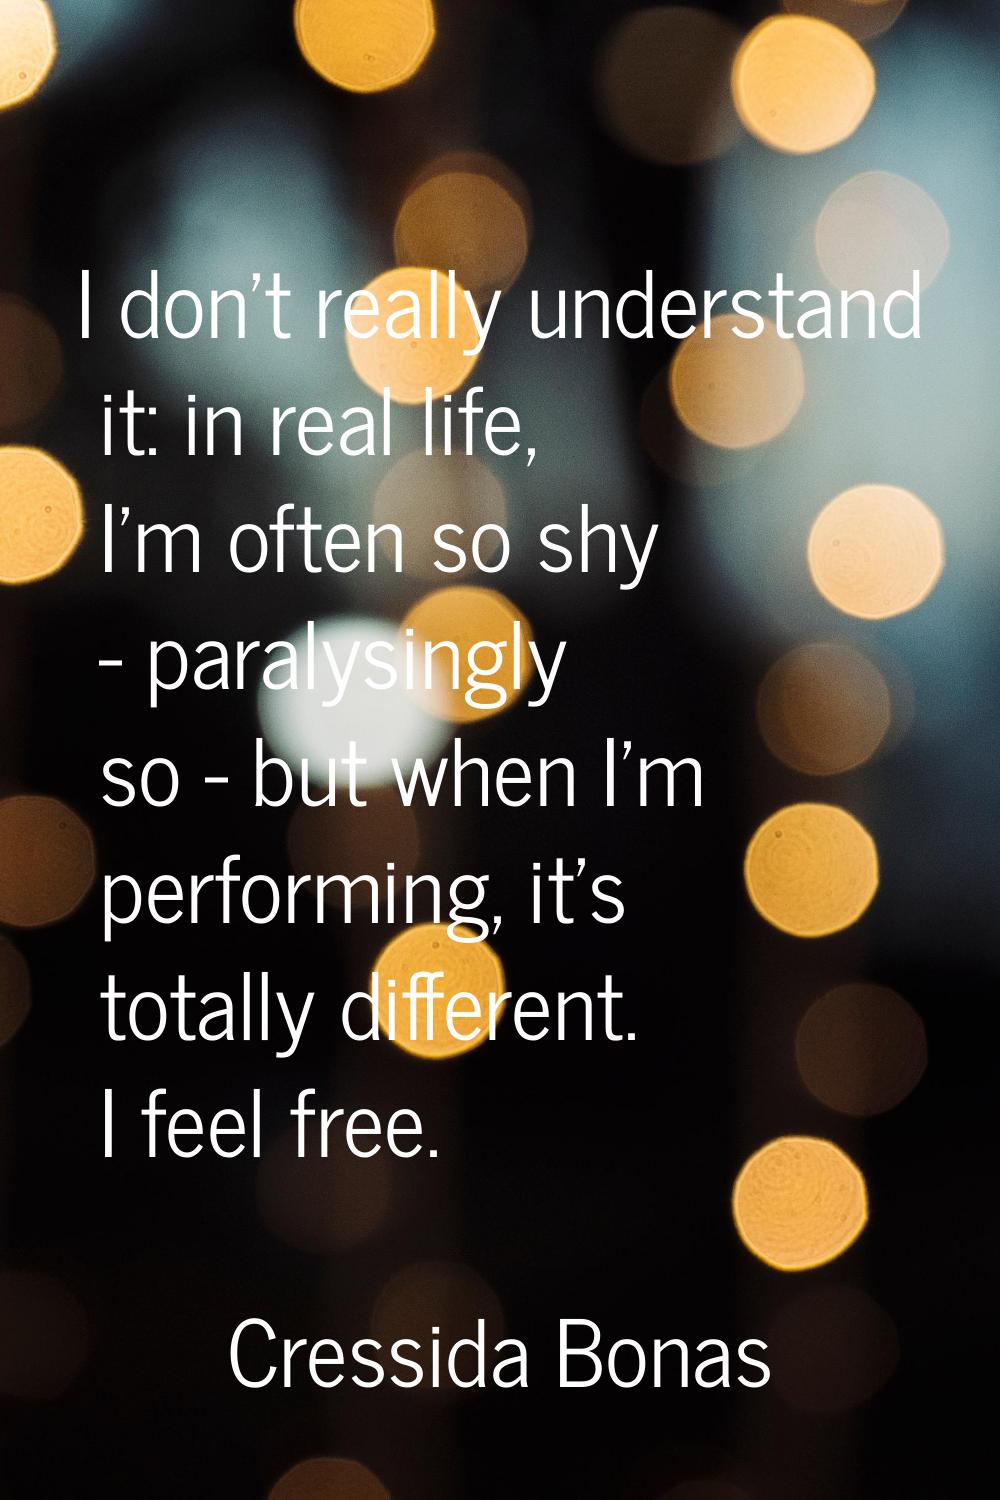 I don't really understand it: in real life, I'm often so shy - paralysingly so - but when I'm perfo